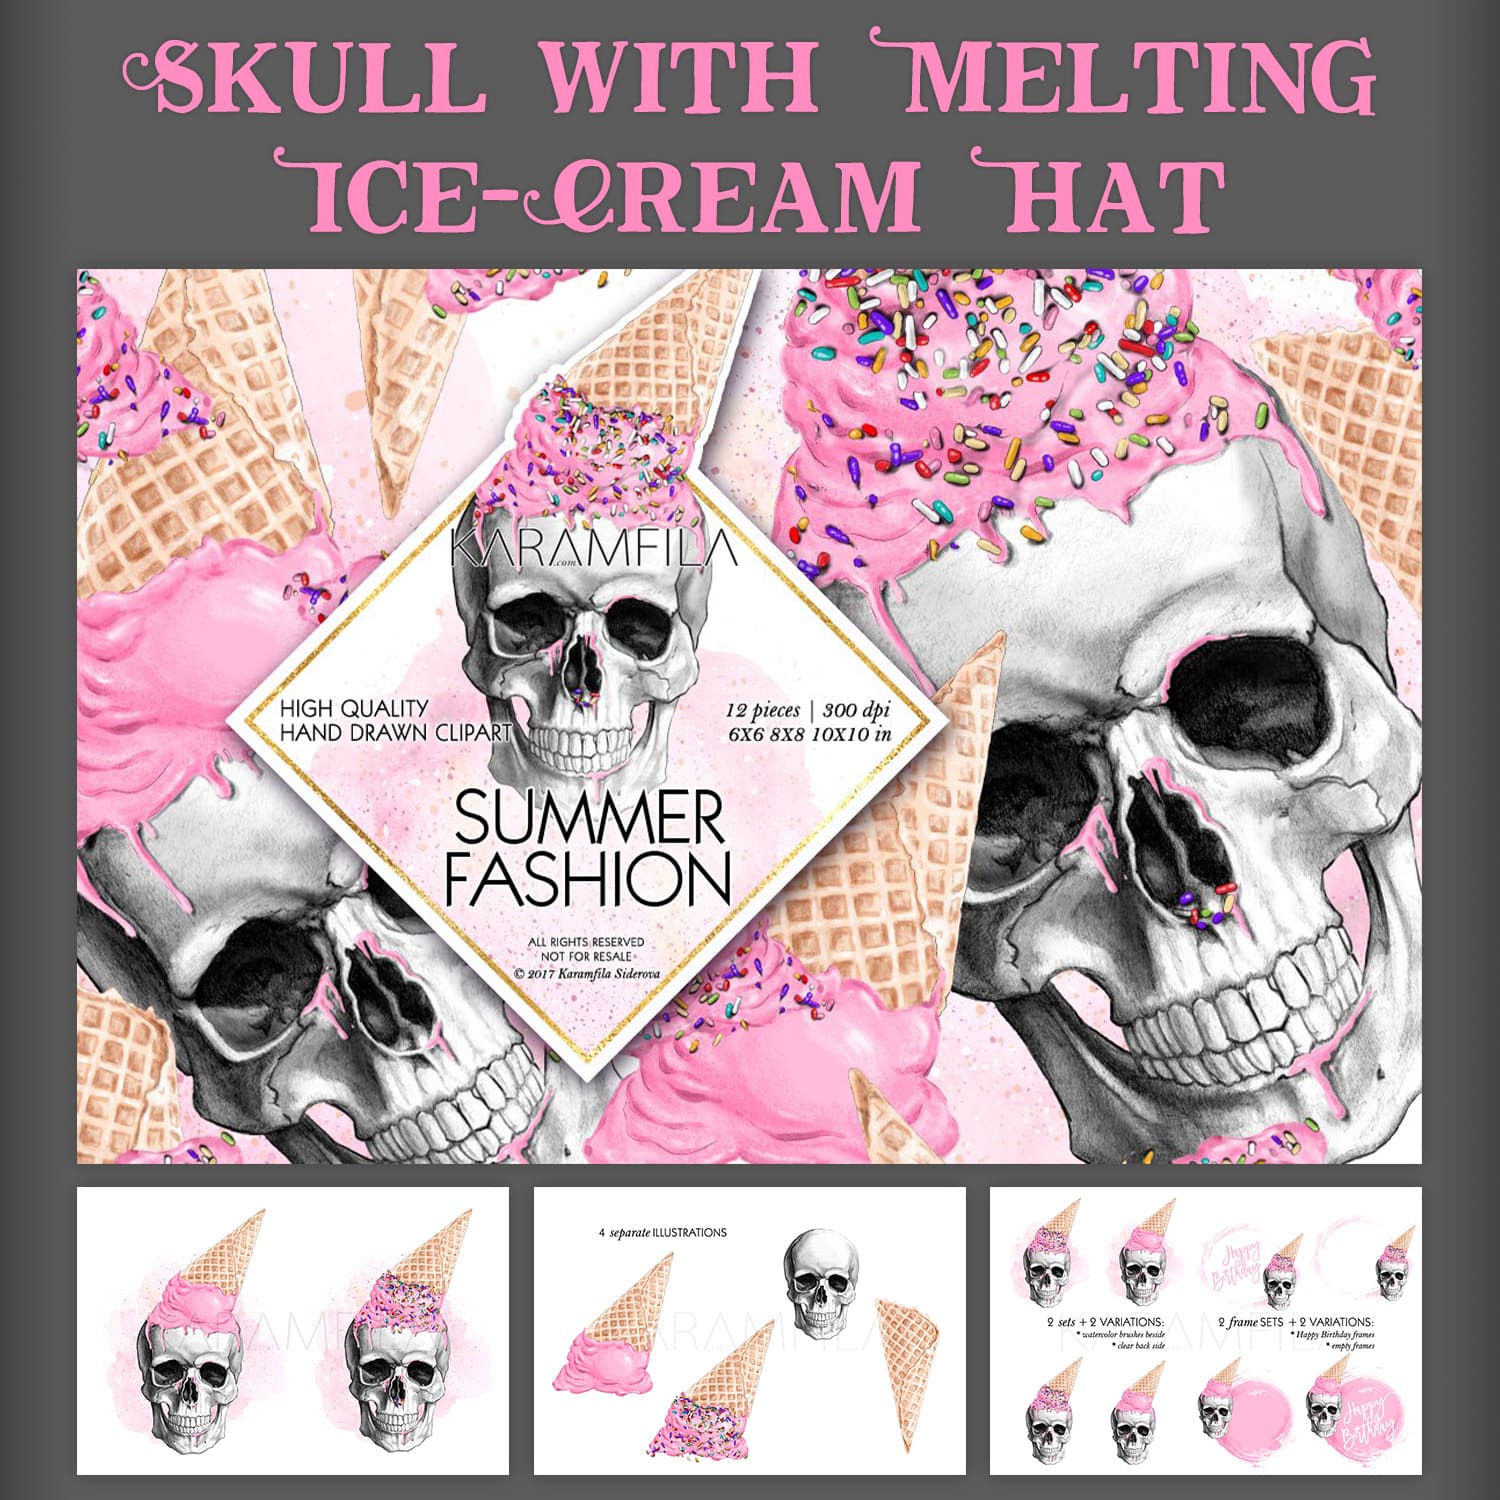 Skull with Melting Ice-Cream Hat cover image.